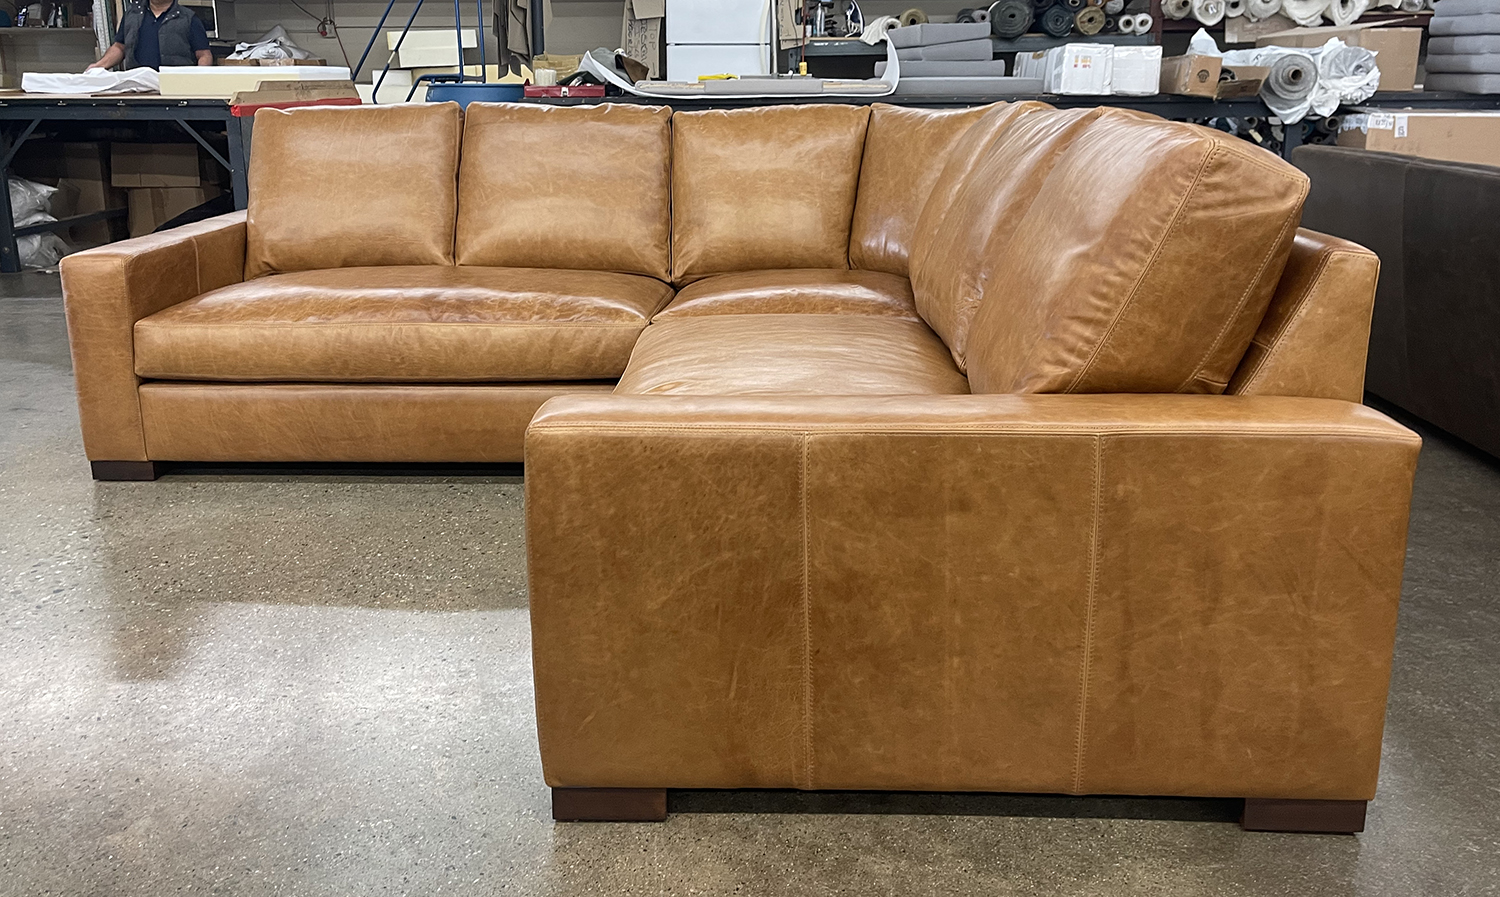 Custom Braxton Rounded Corner Sectional in Mont Blanc Sycamore Leather - RAF side view